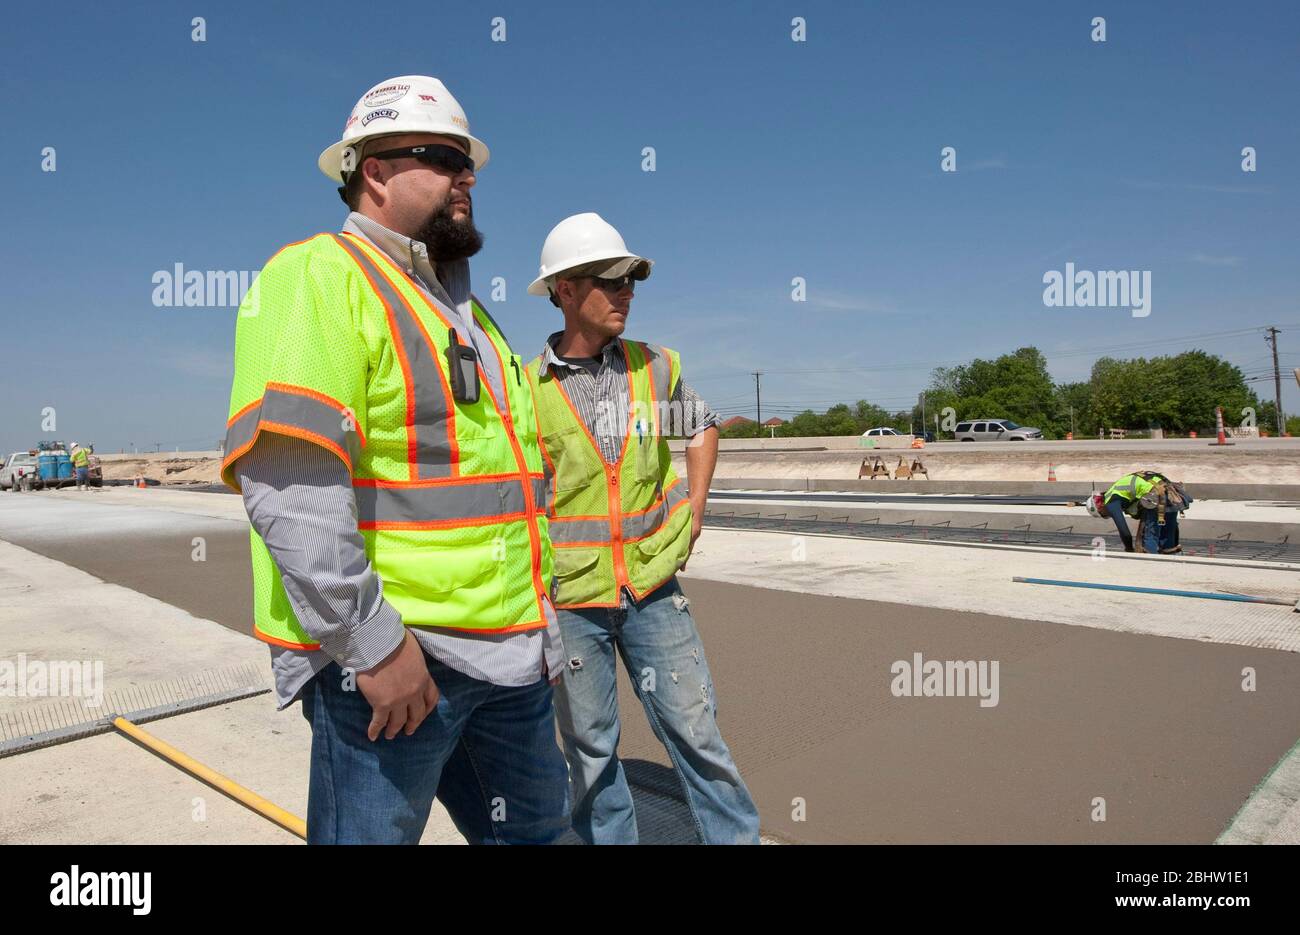 Austin Texas USA, April 6, 2011: Construction supervisor watches over crew working on concrete highway. ©Marjorie Kamys Cotera/Daemmrich Photography Stock Photo